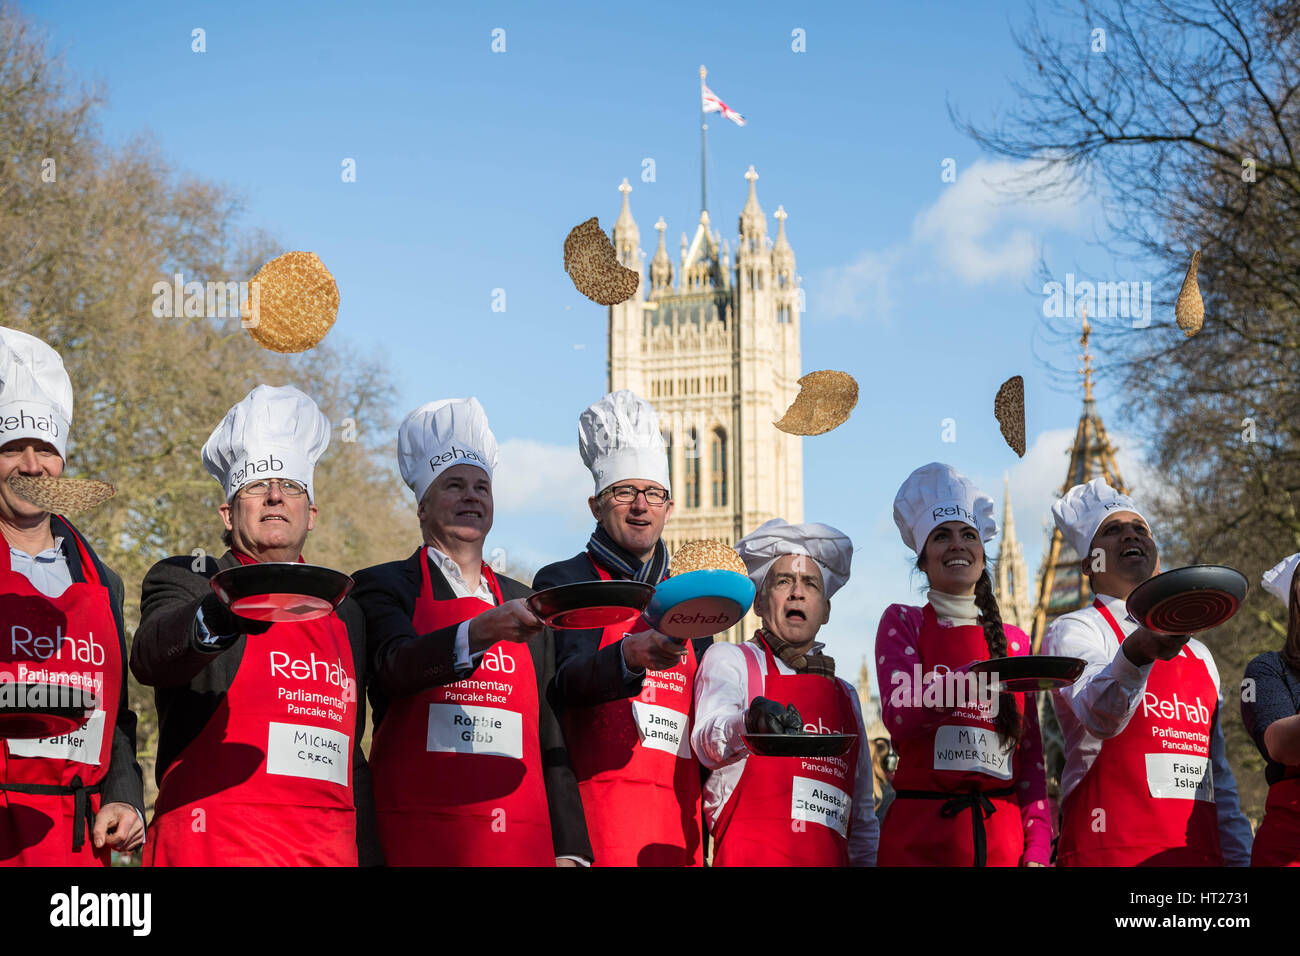 L-R George Parker, Michael Crick, Robbie Gibb, James Landale, Alastair Stewart, Mia Wormesley & Fasial Islam. MPs, Lords and Media attend the 20th Annual Rehab Parliamentary Pancake Race at Victoria Gardens in Westminster, London, UK. Stock Photo